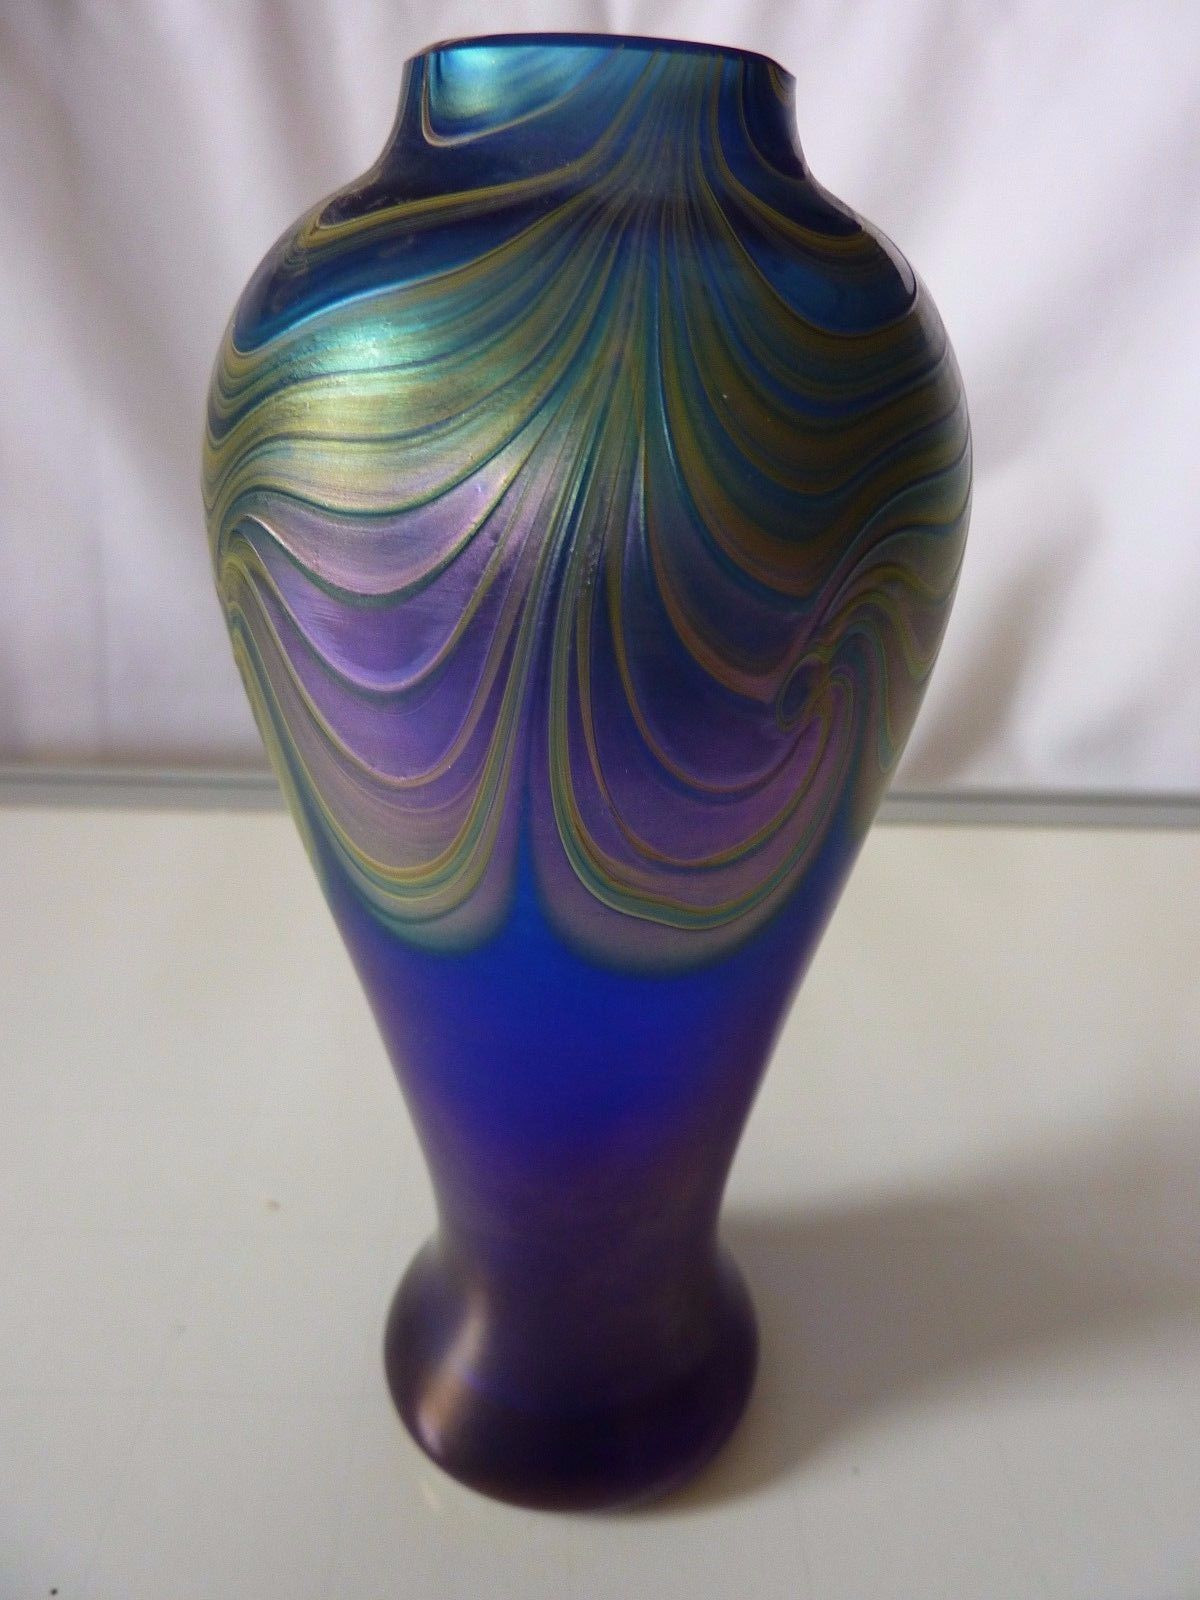 Colored Glass Vases Cheap Of Okra Glass Vase Blue and Iridescent Glassies British Okra In Okra Glass Vase Blue and Iridescent Ebay